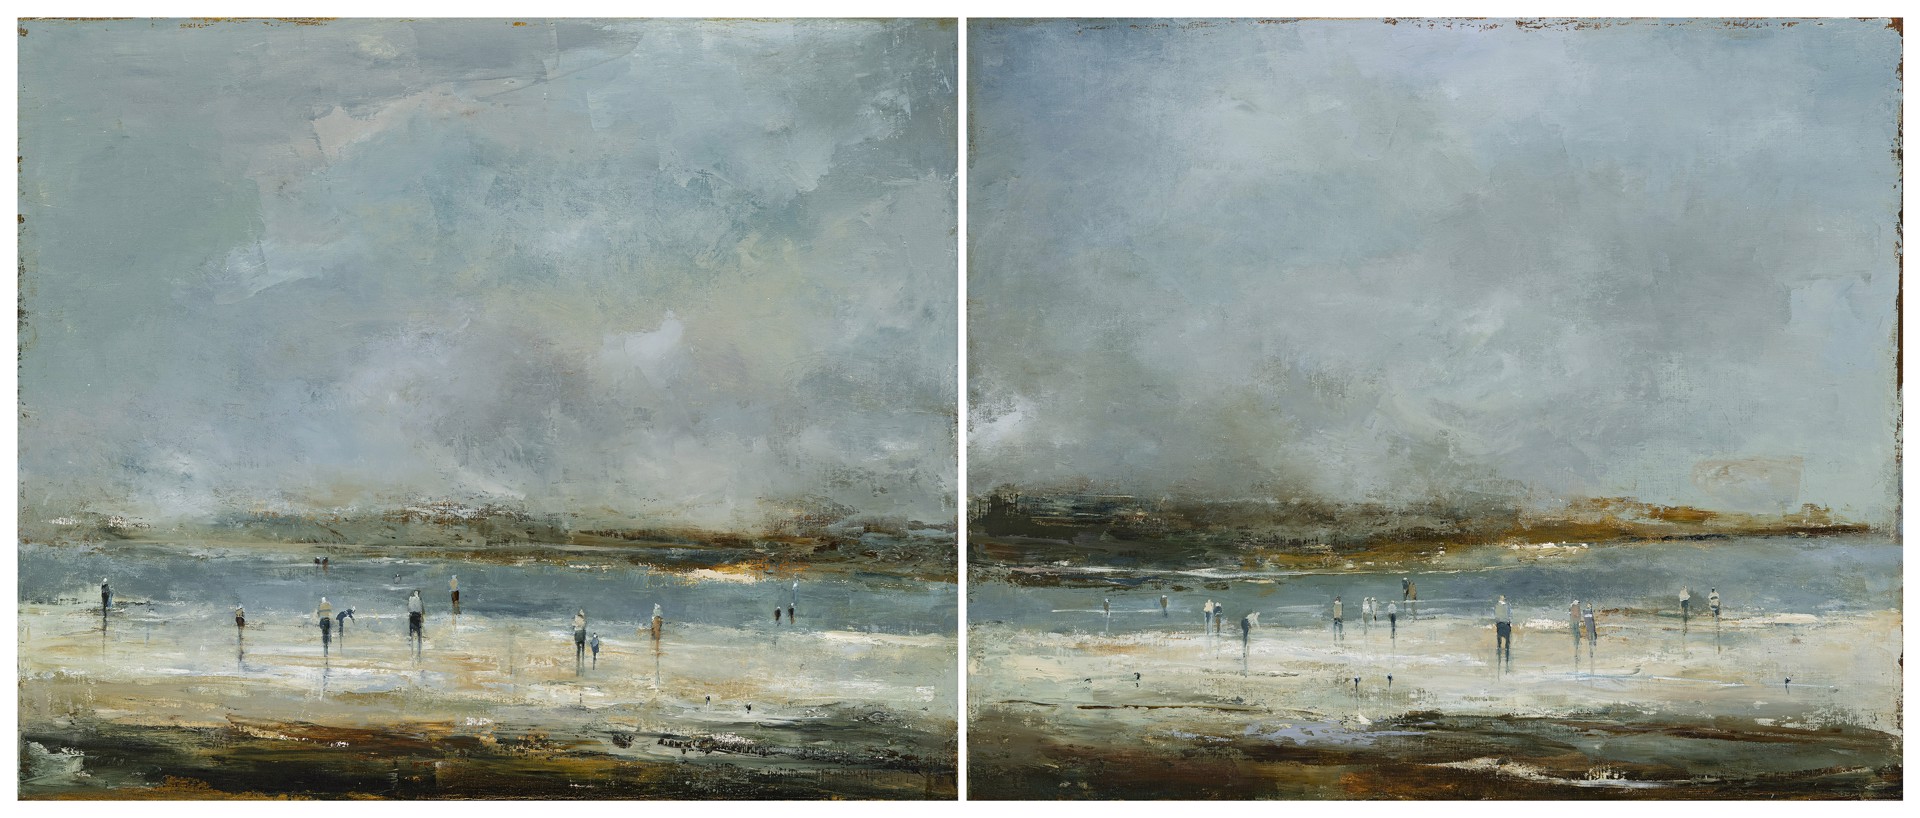 They glide like dancers in the wide hall by France Jodoin